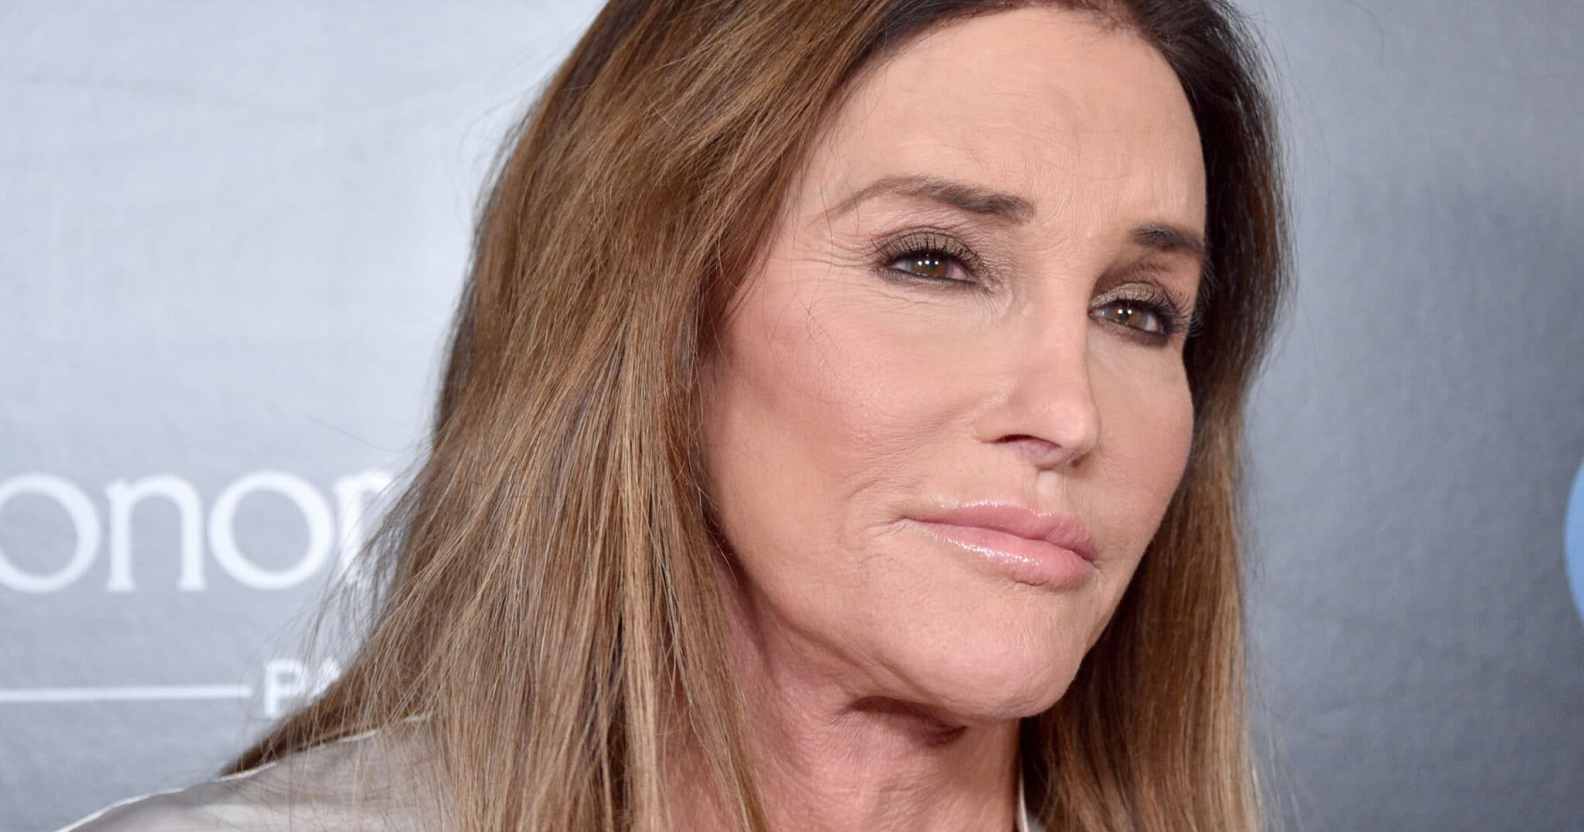 Caitlyn Jenner at the 60th Anniversary party for the Monte-Carlo TV Festival in 202